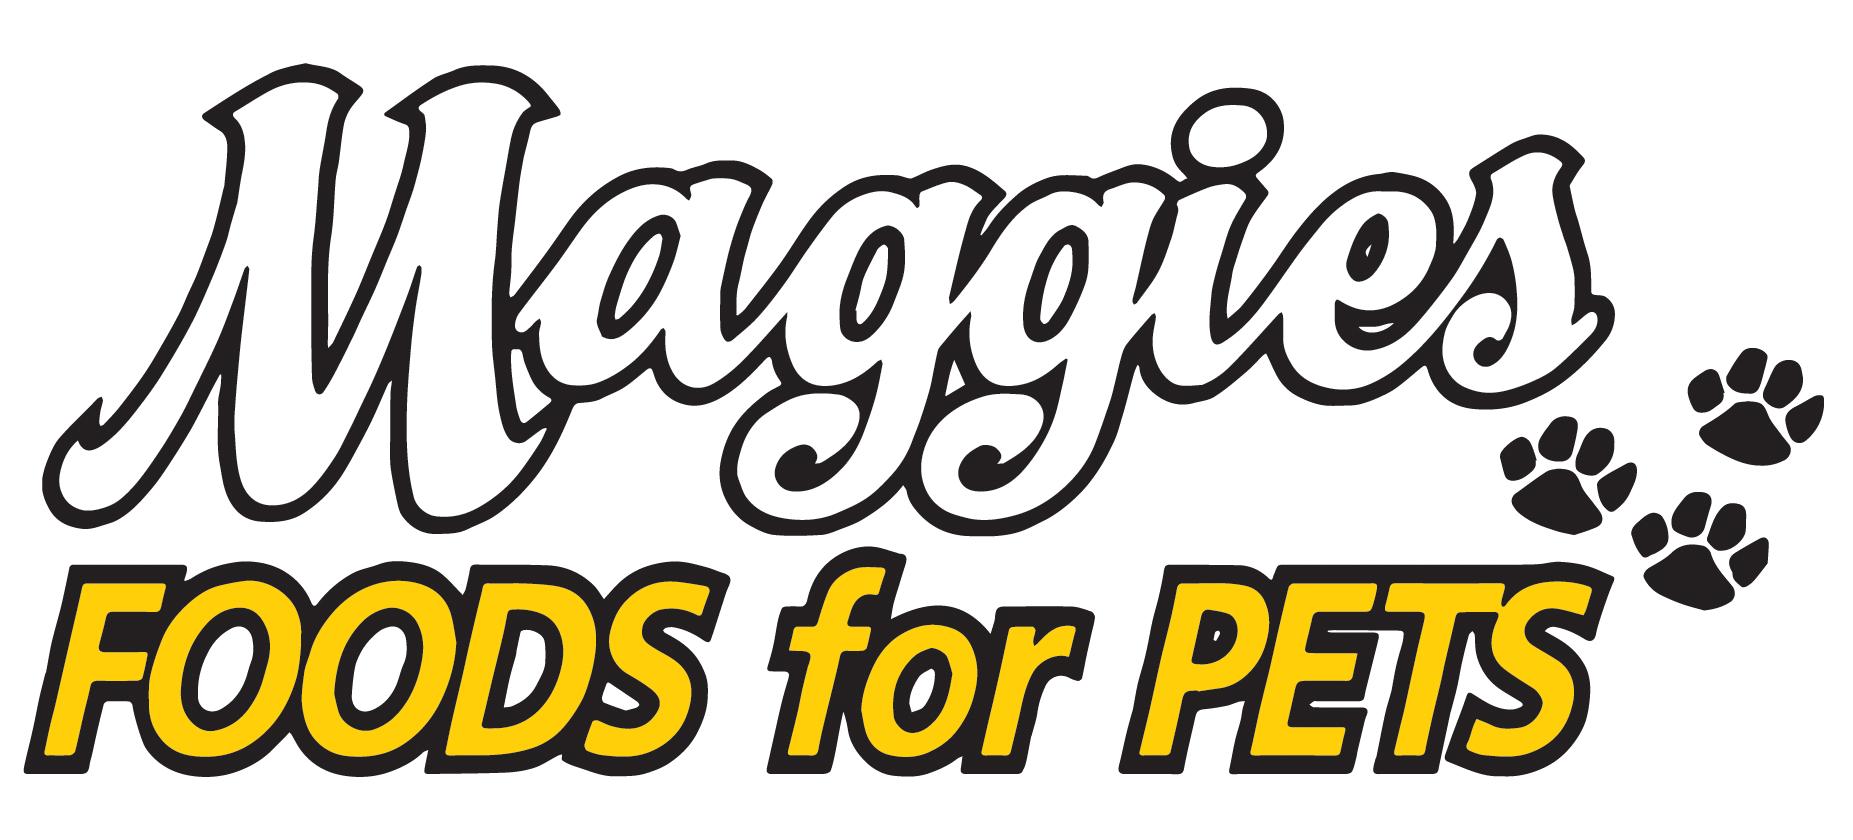 Maggie's Foods for Pets